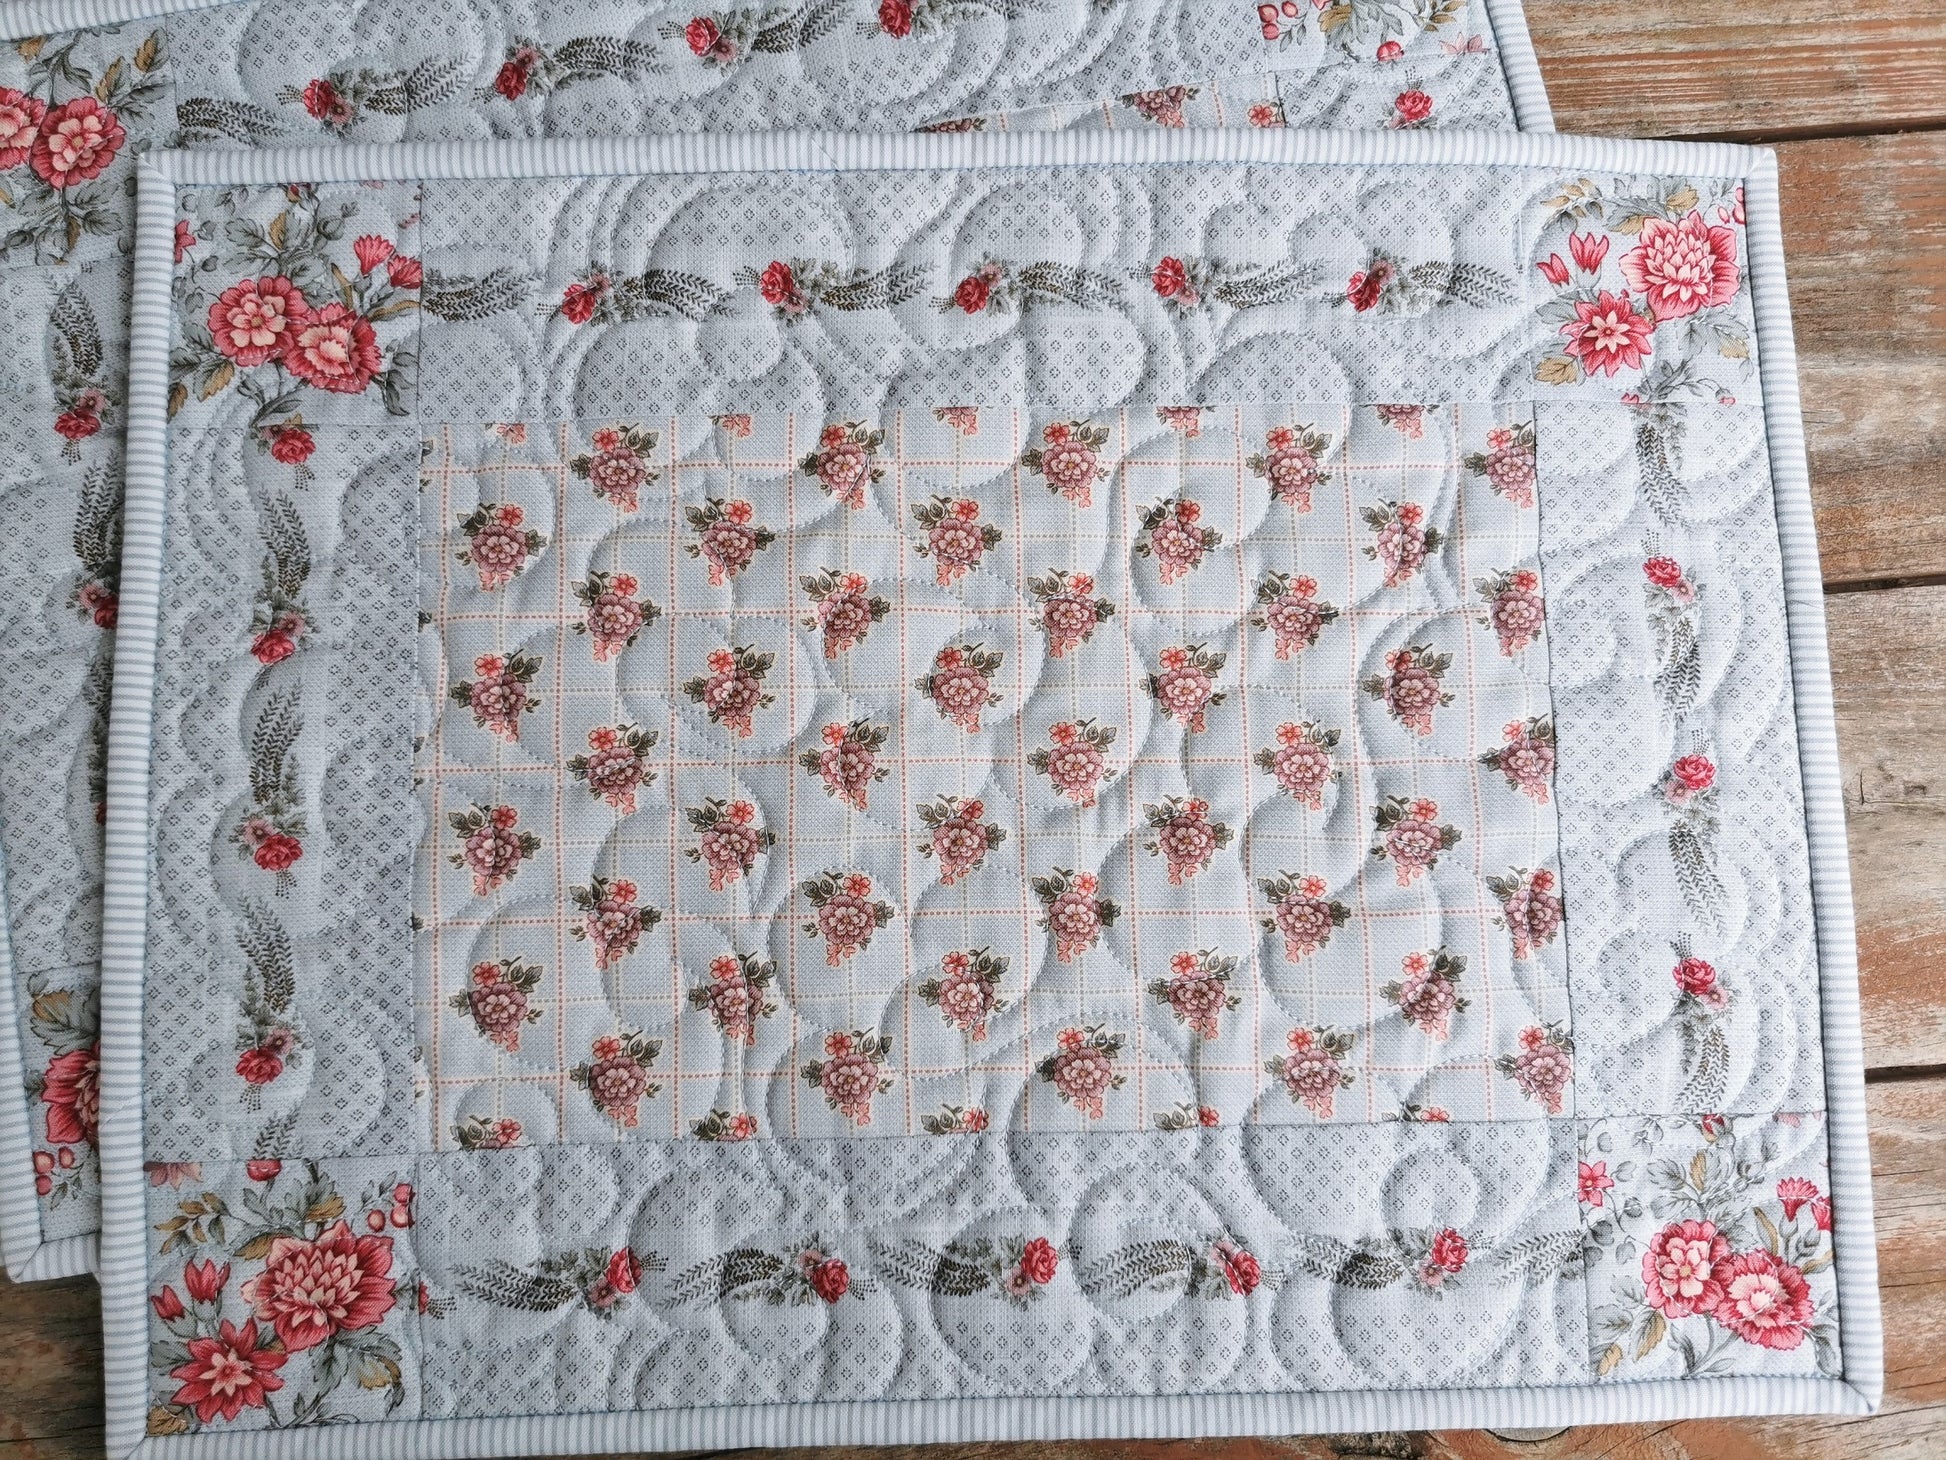 The entire quilted placemat is is shown close up to highlight the fabrics and floral motif quilting.